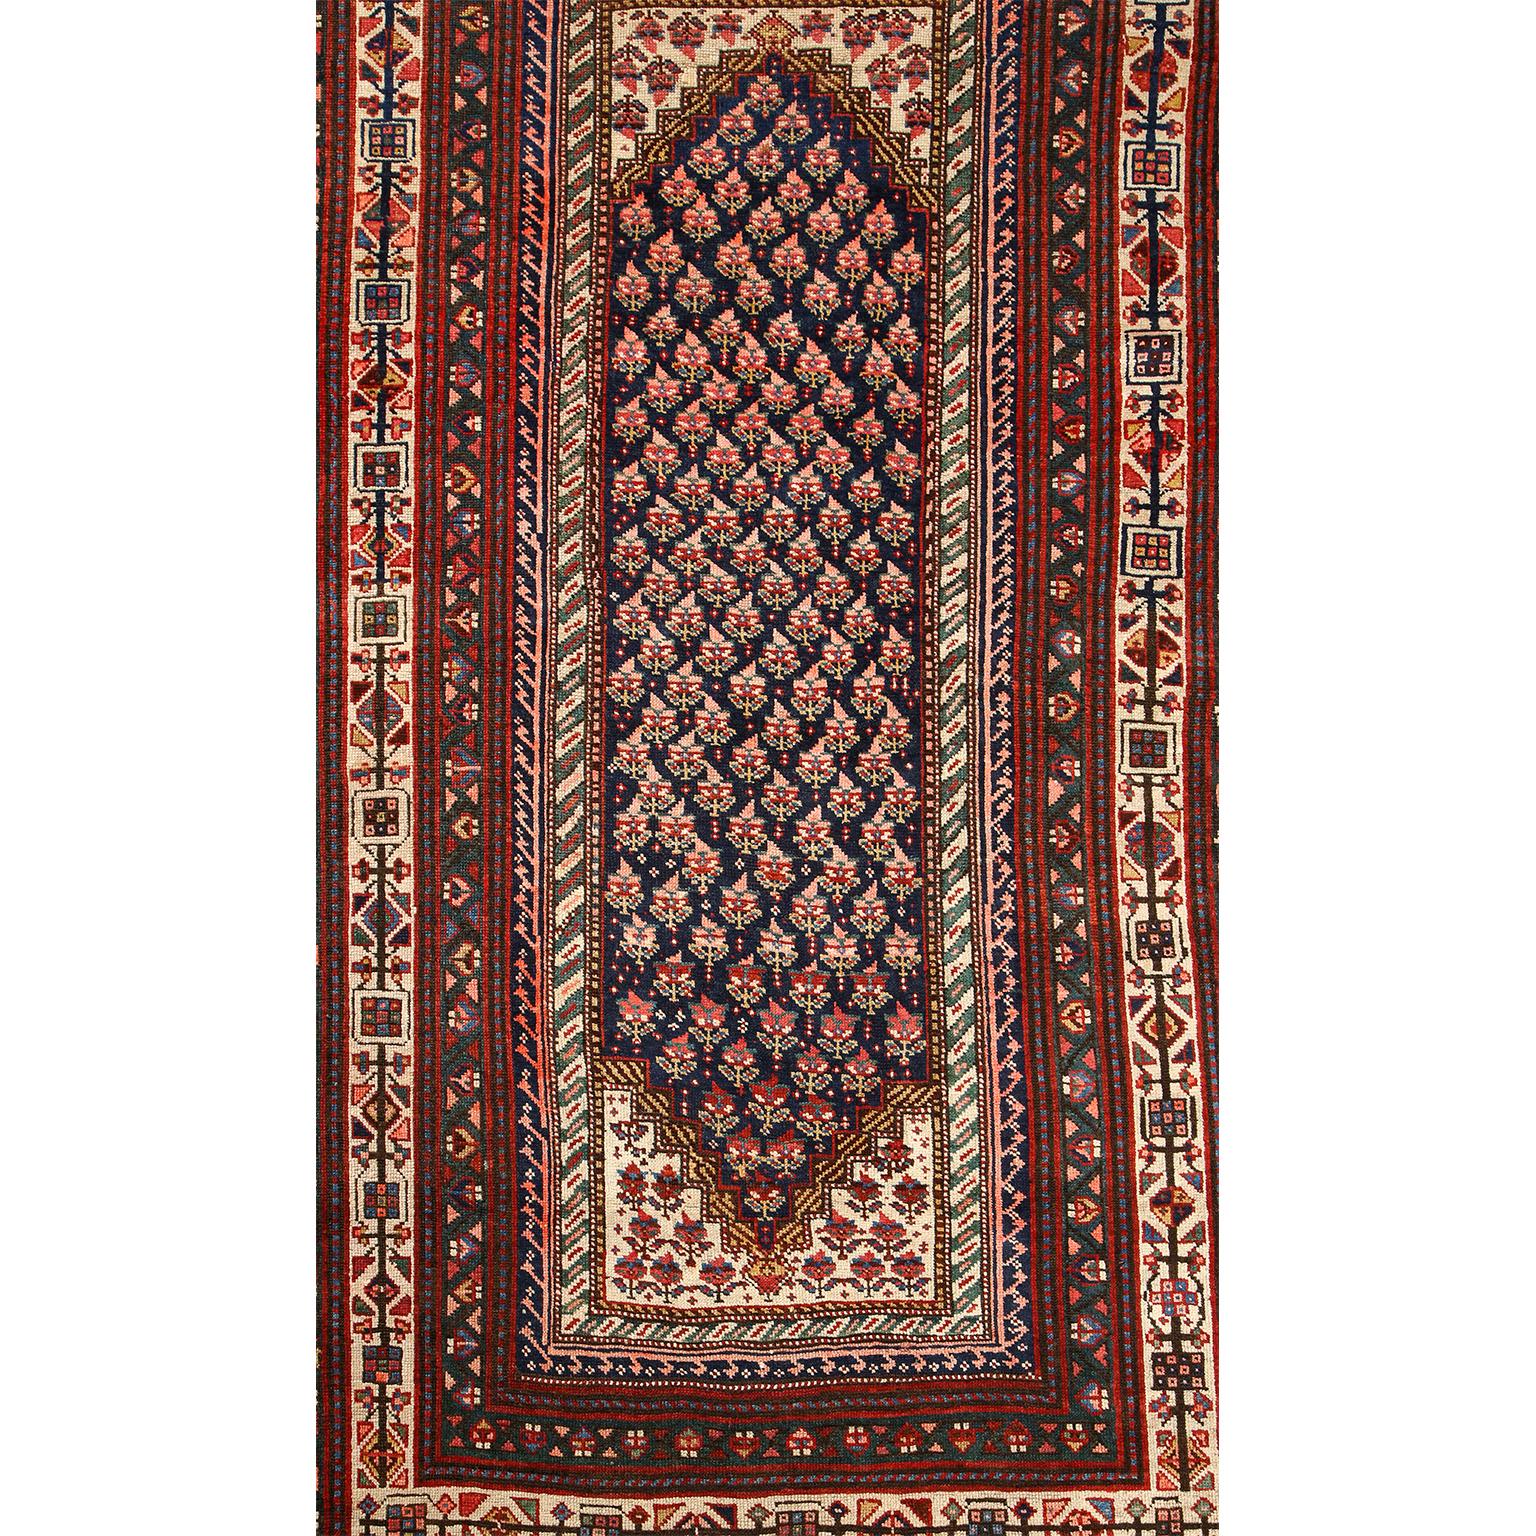 This antique Persian Senneh carpet in pure handspun wool and vegetable dyes circa 1900 features a floral patterned central medallion and field with multiple borders of alternating geometric designs. Bright cream colored wools and deep indigo